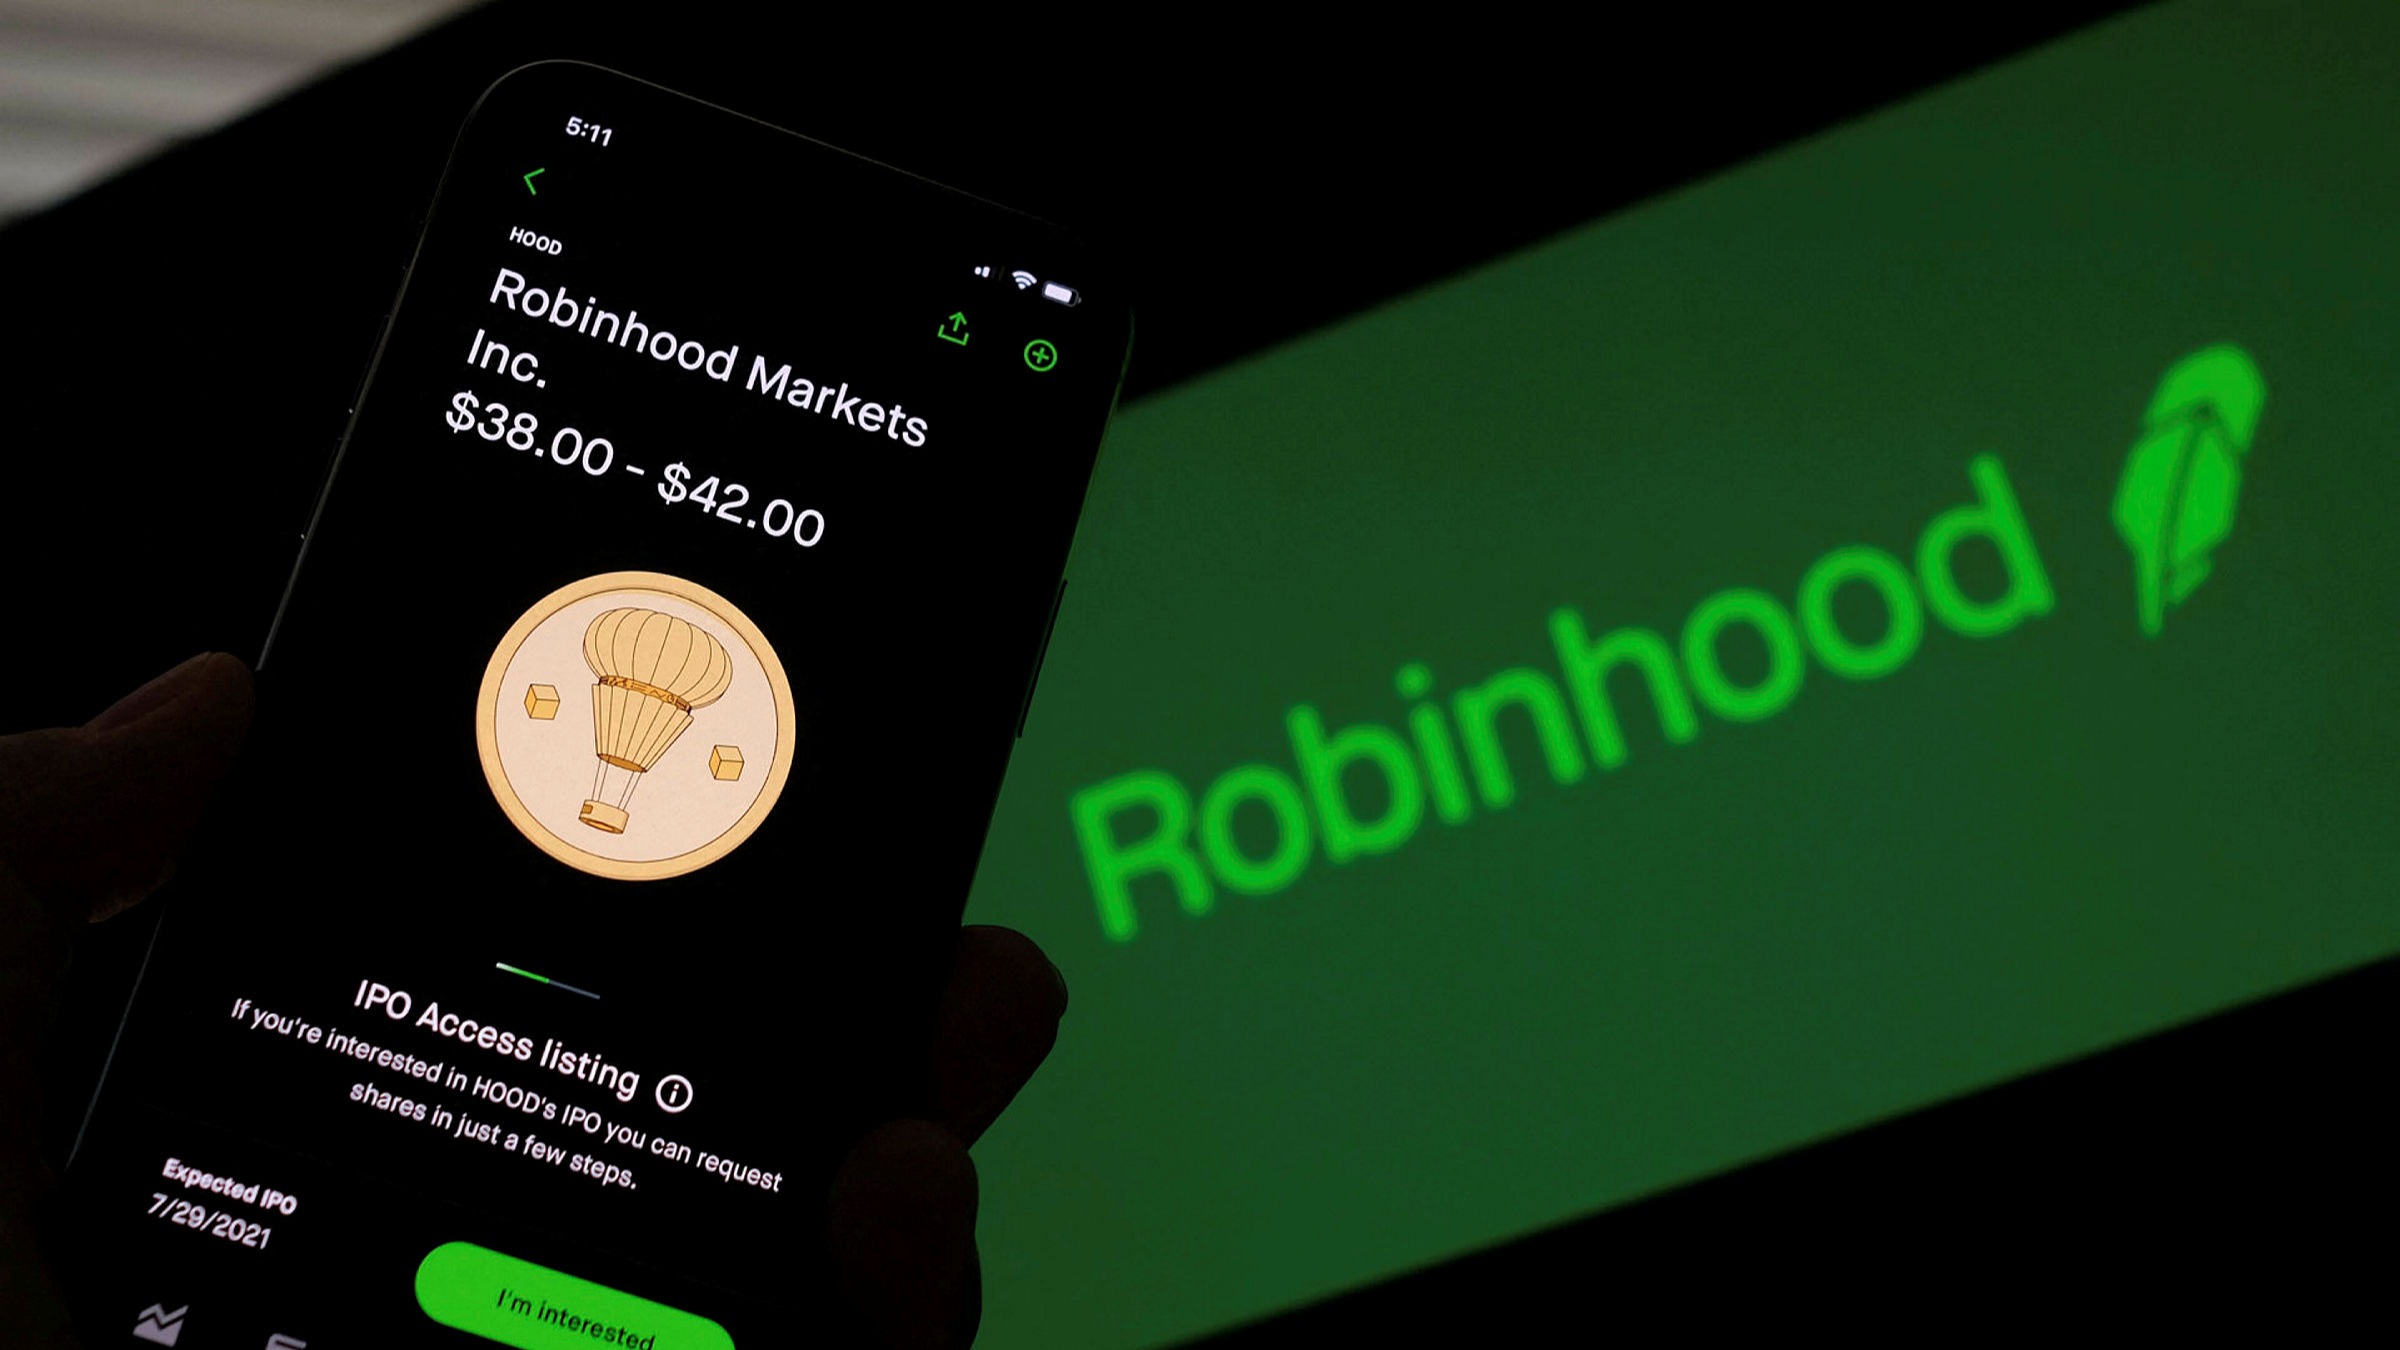 when will robinhood get crypto wallets